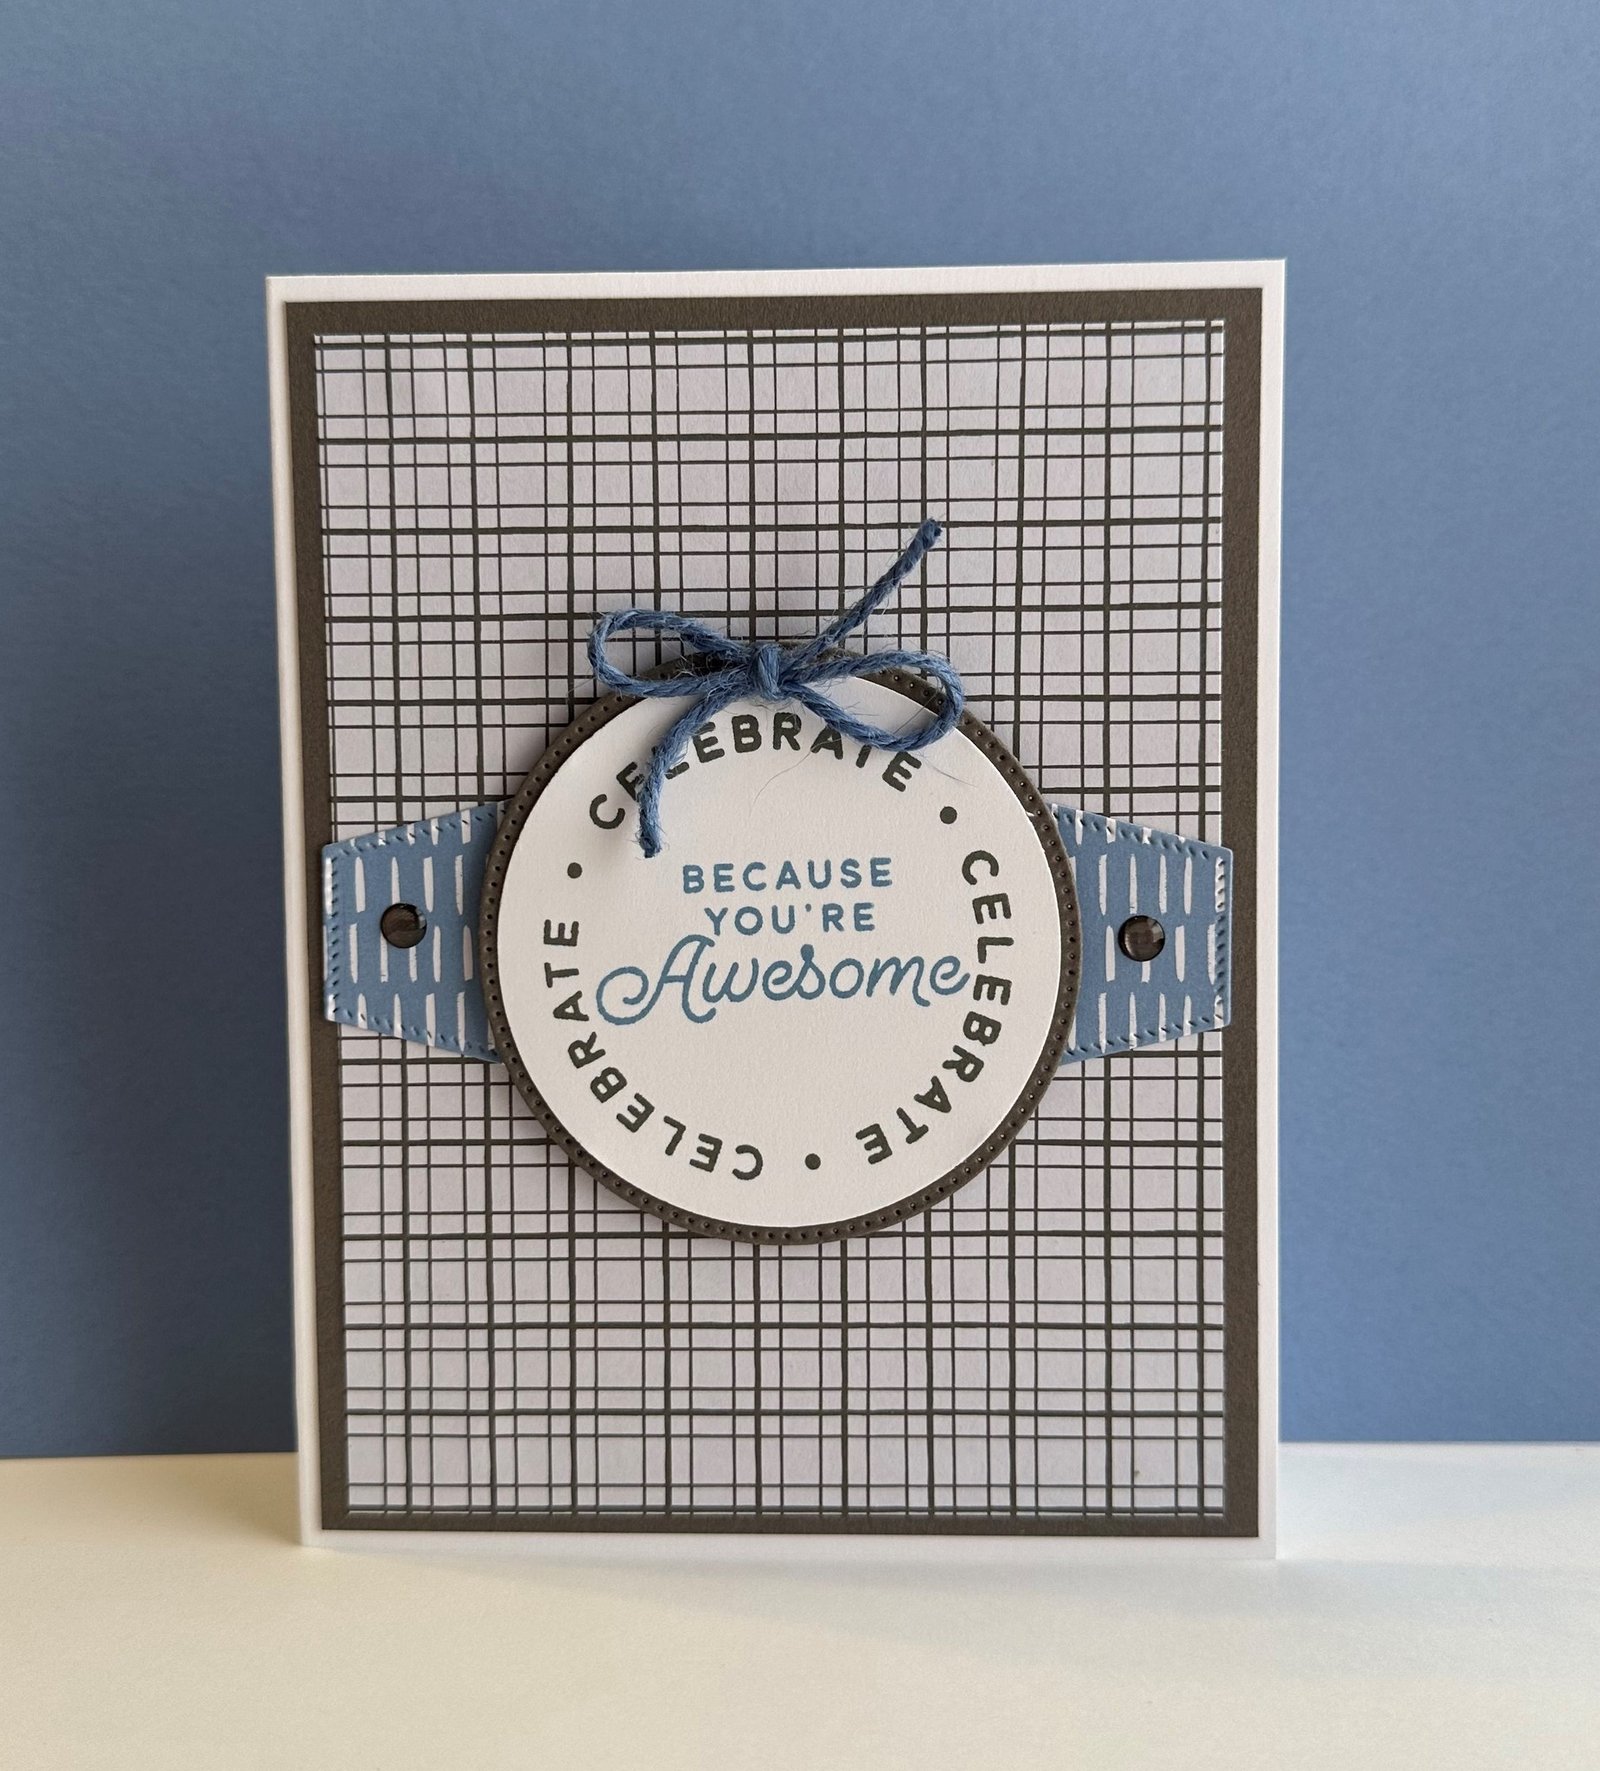 Stampin' UP! Circle Sayings in blues and circle sentiment "because you're awesome"